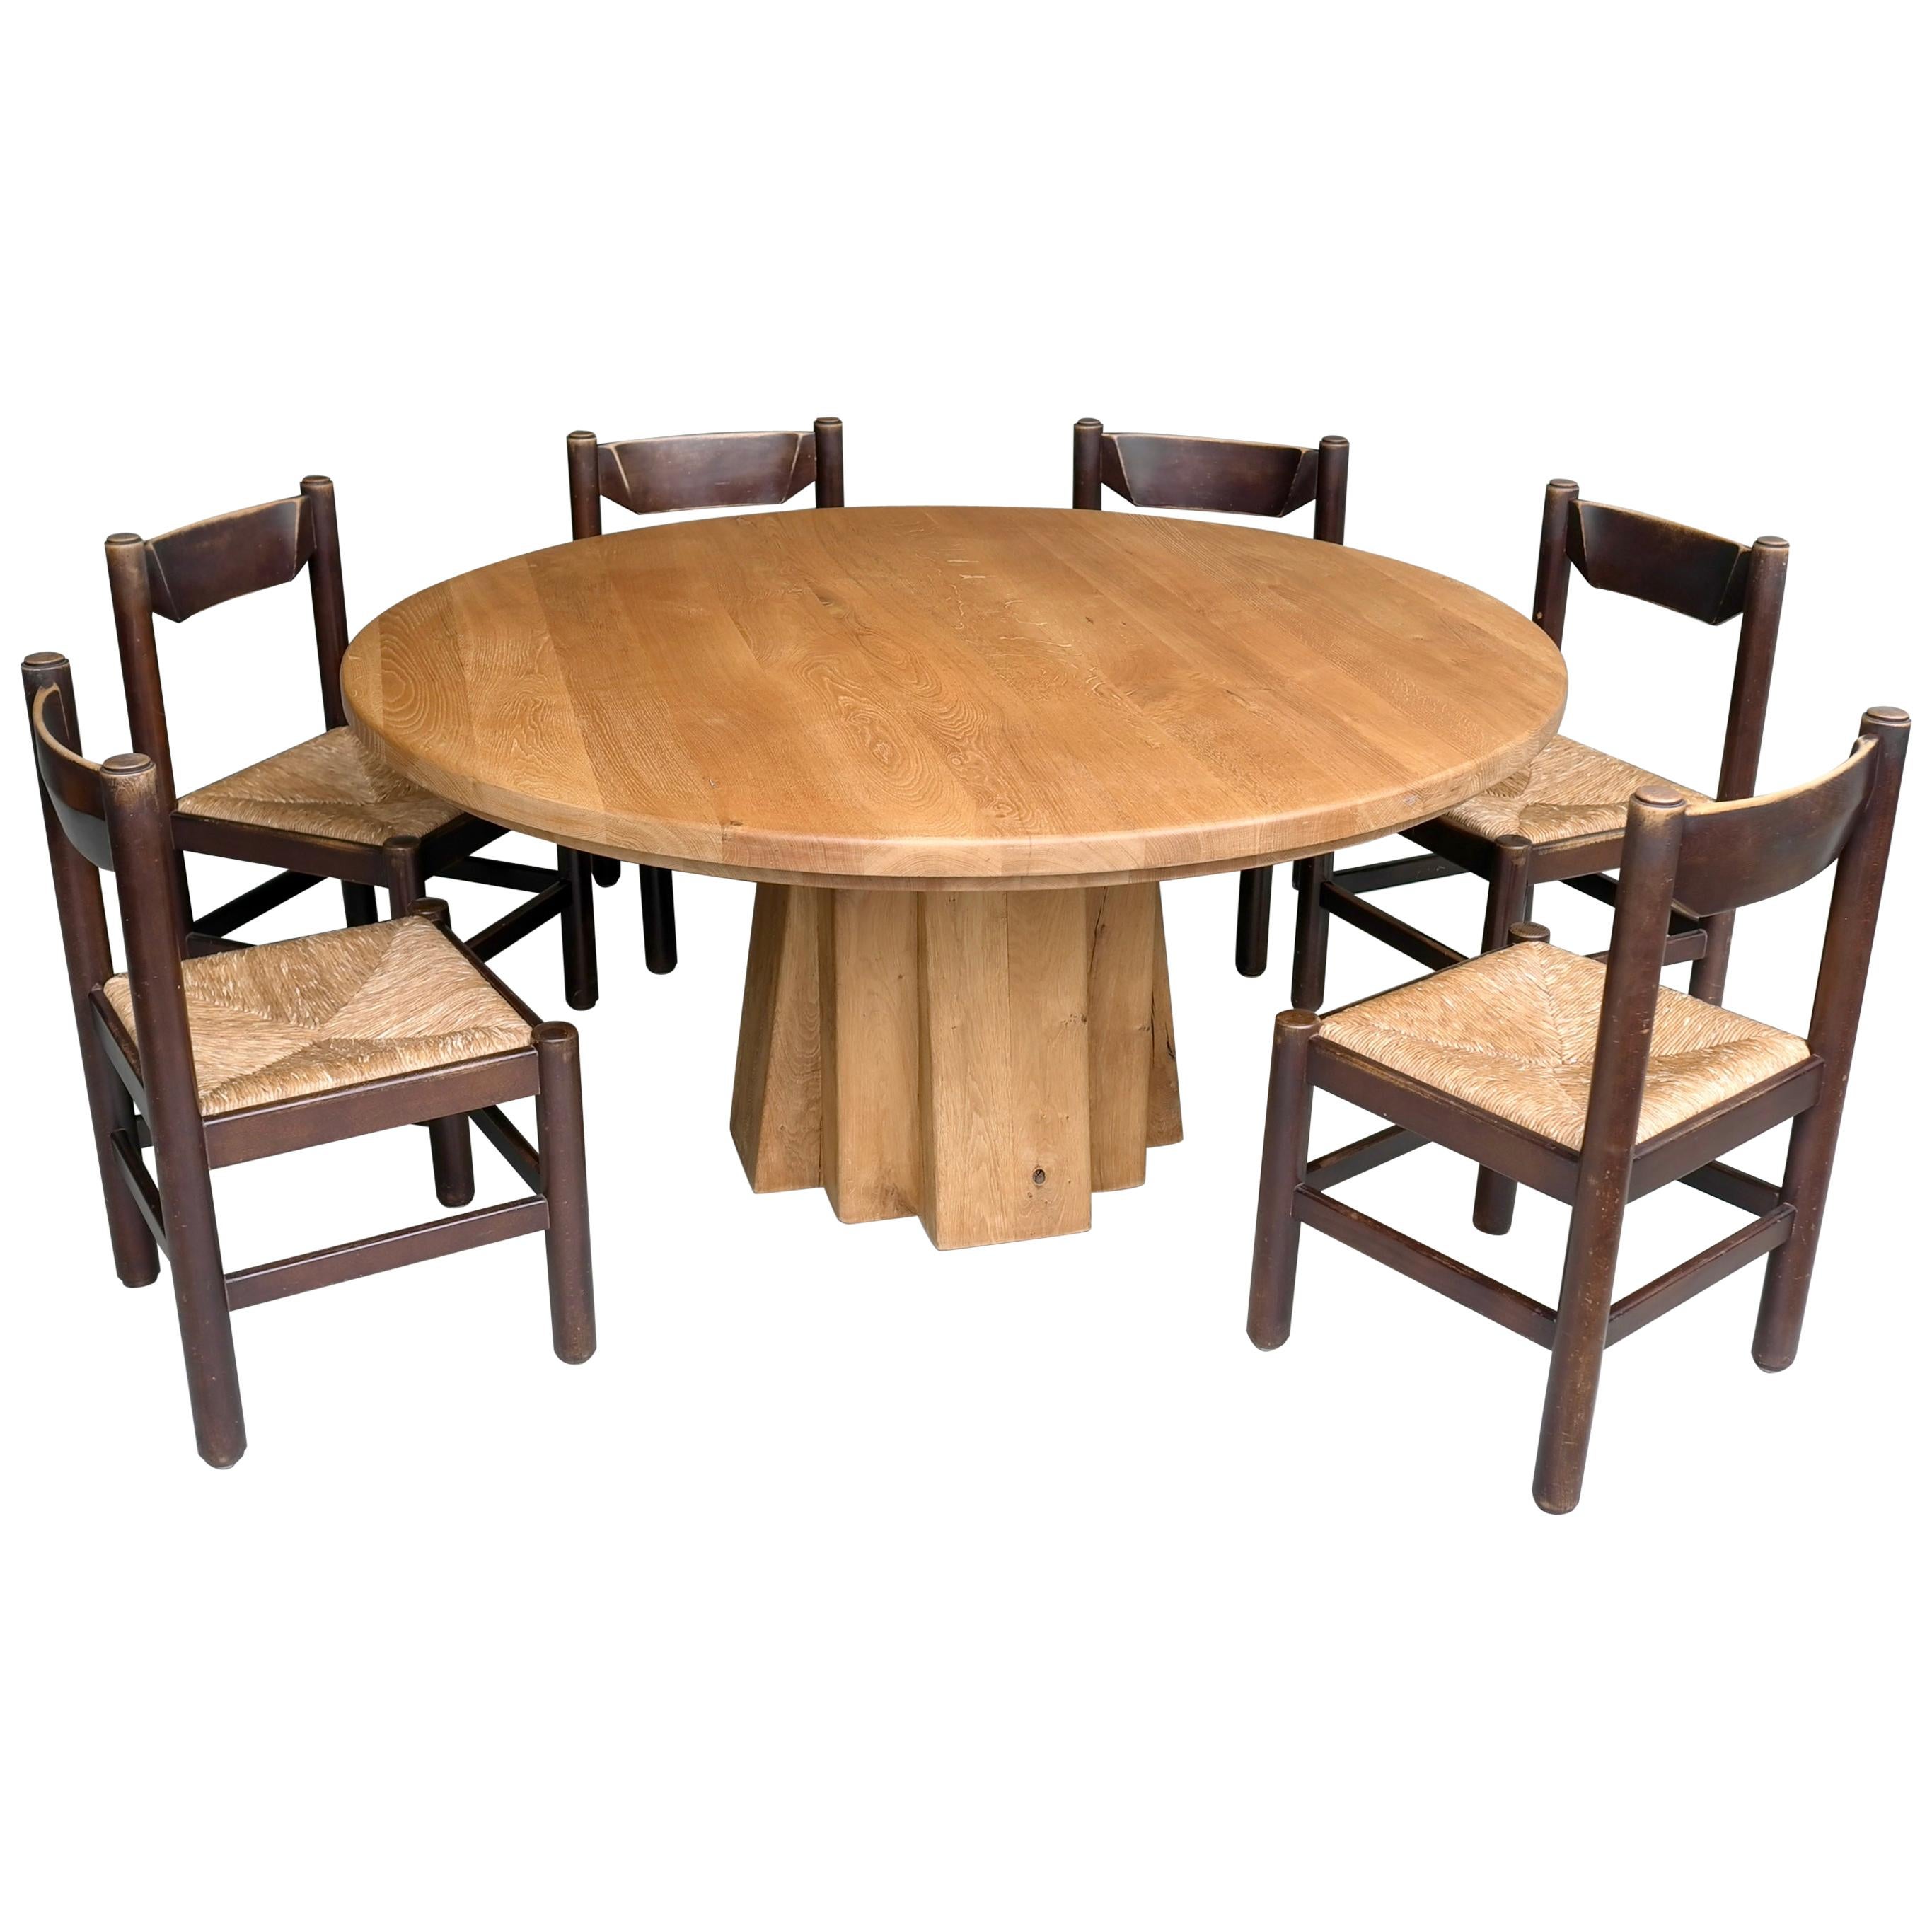 Extra Large Round Oak Sculptural Dining, Large Round Dining Table Set Seats 6